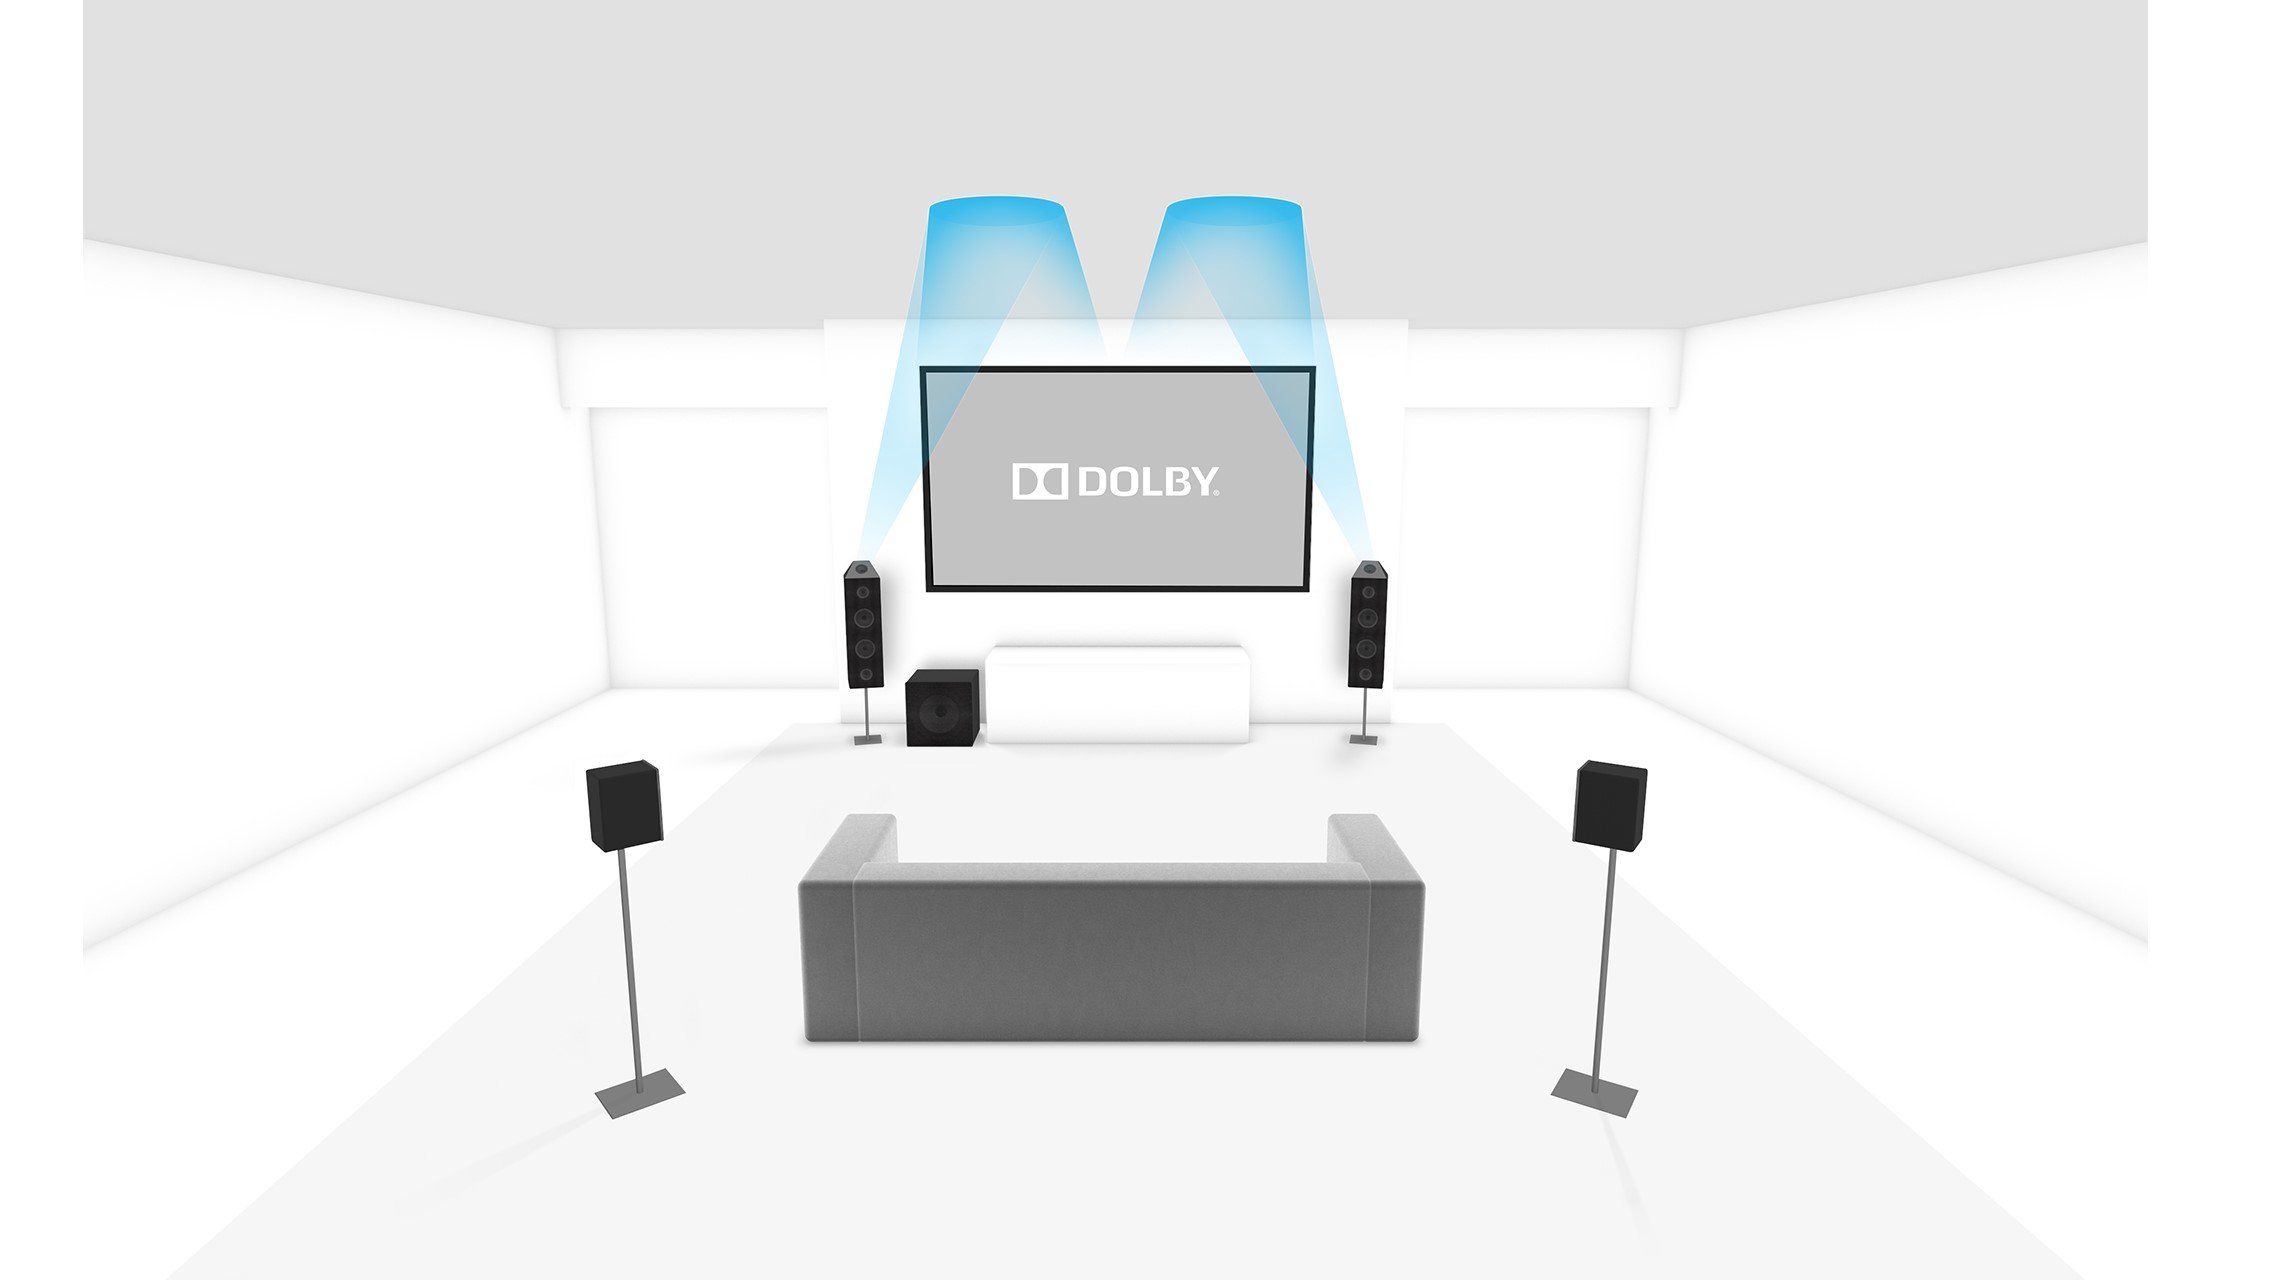 dolby atmos speaker placement 7.1.4 bundle